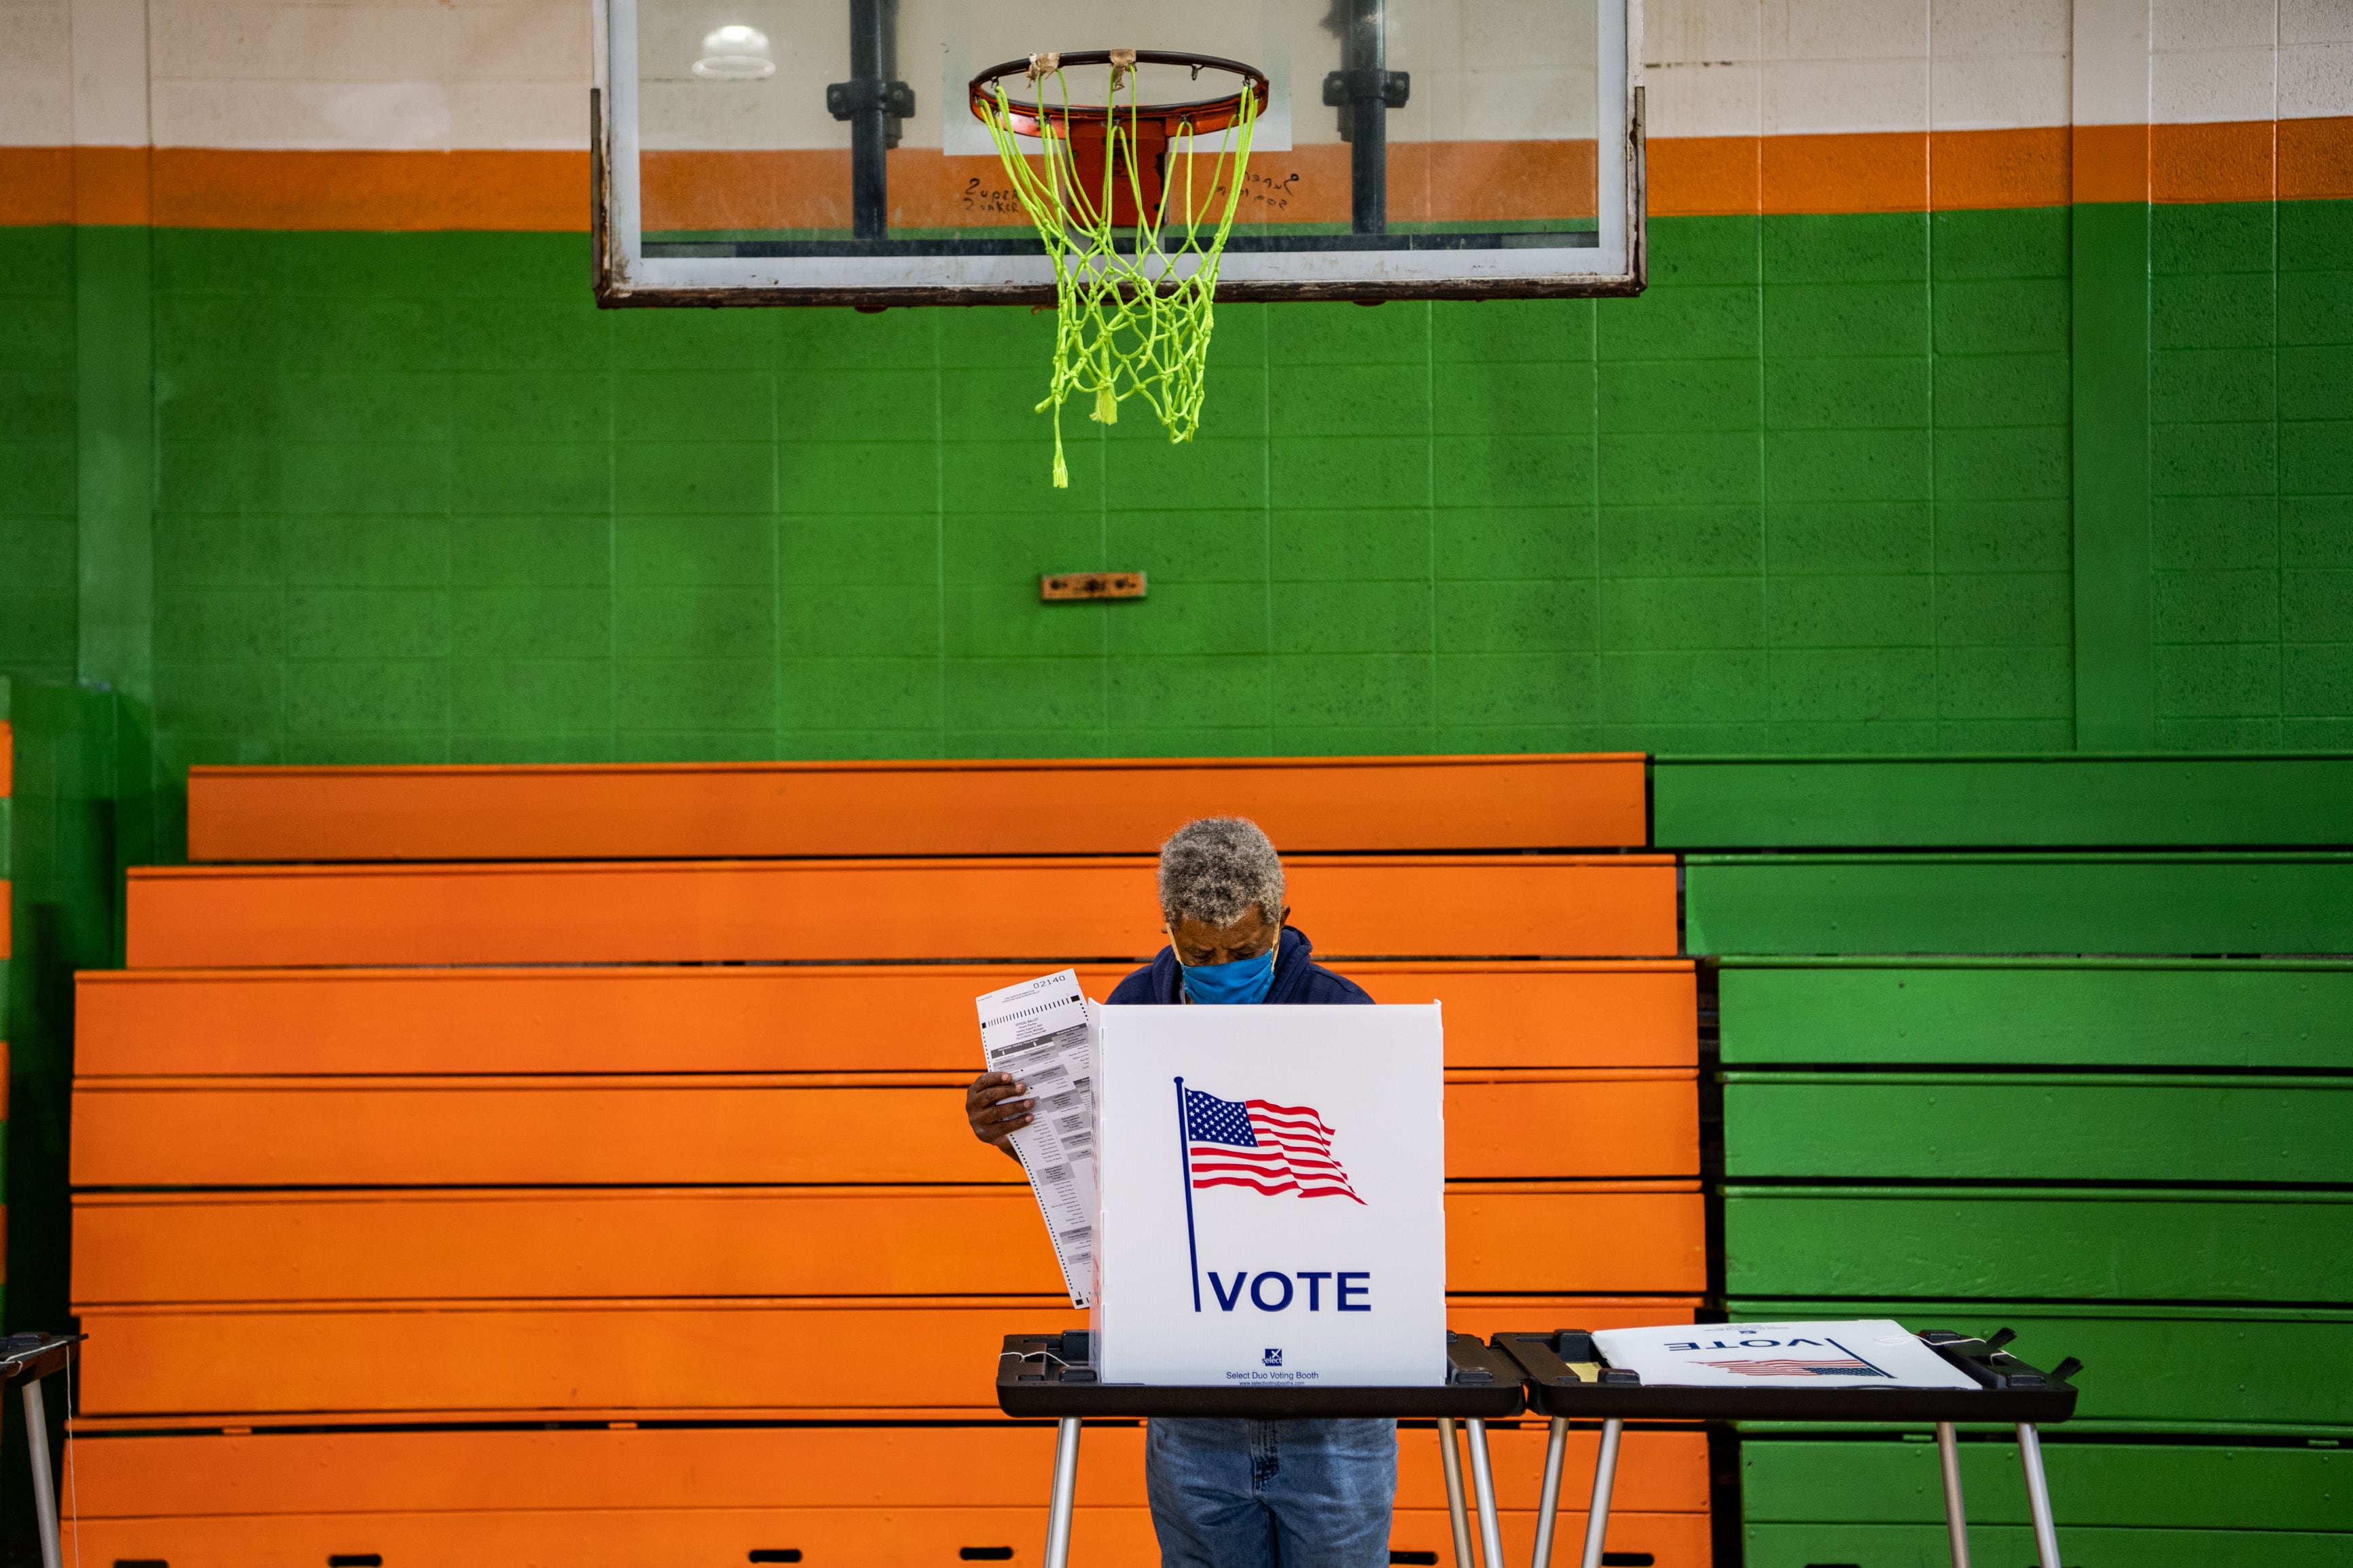 A man, wearing a blue surgical mask, votes at a polling station on a basketball court. The walls and bleachers behind him are bright green and orange.